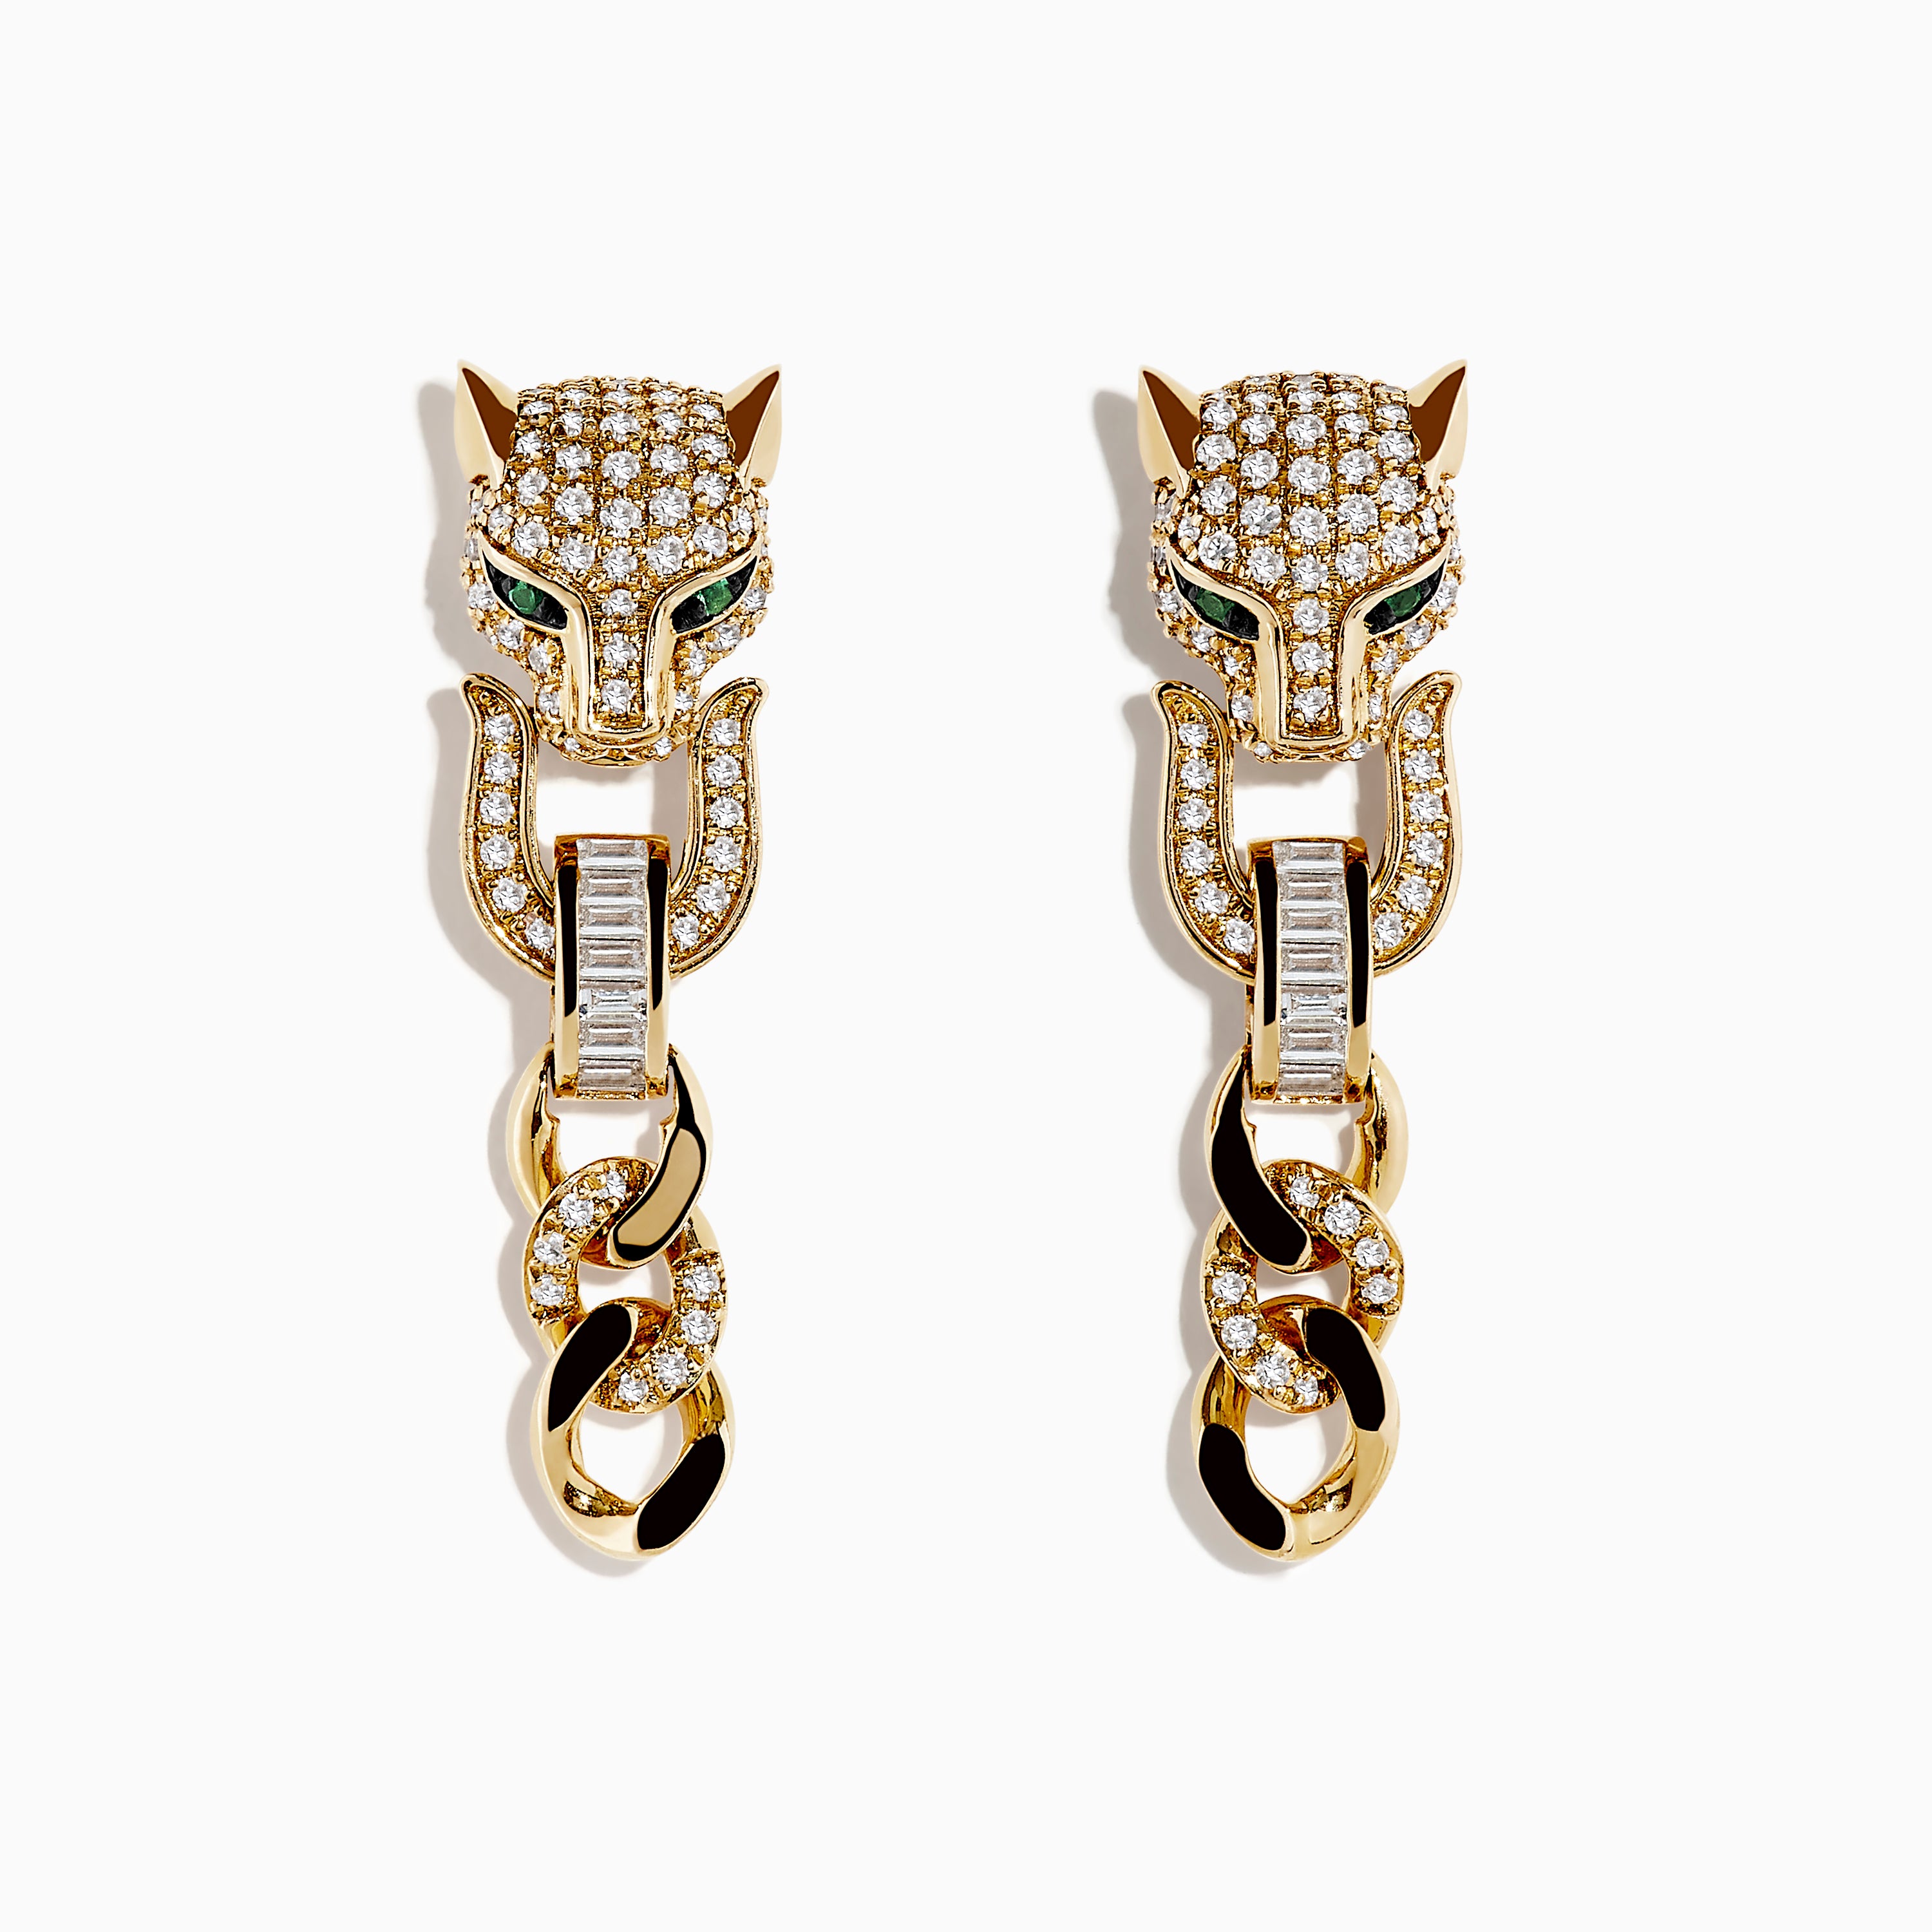 Cartier Gold and Onyx Panther Earrings - M. Khordipour